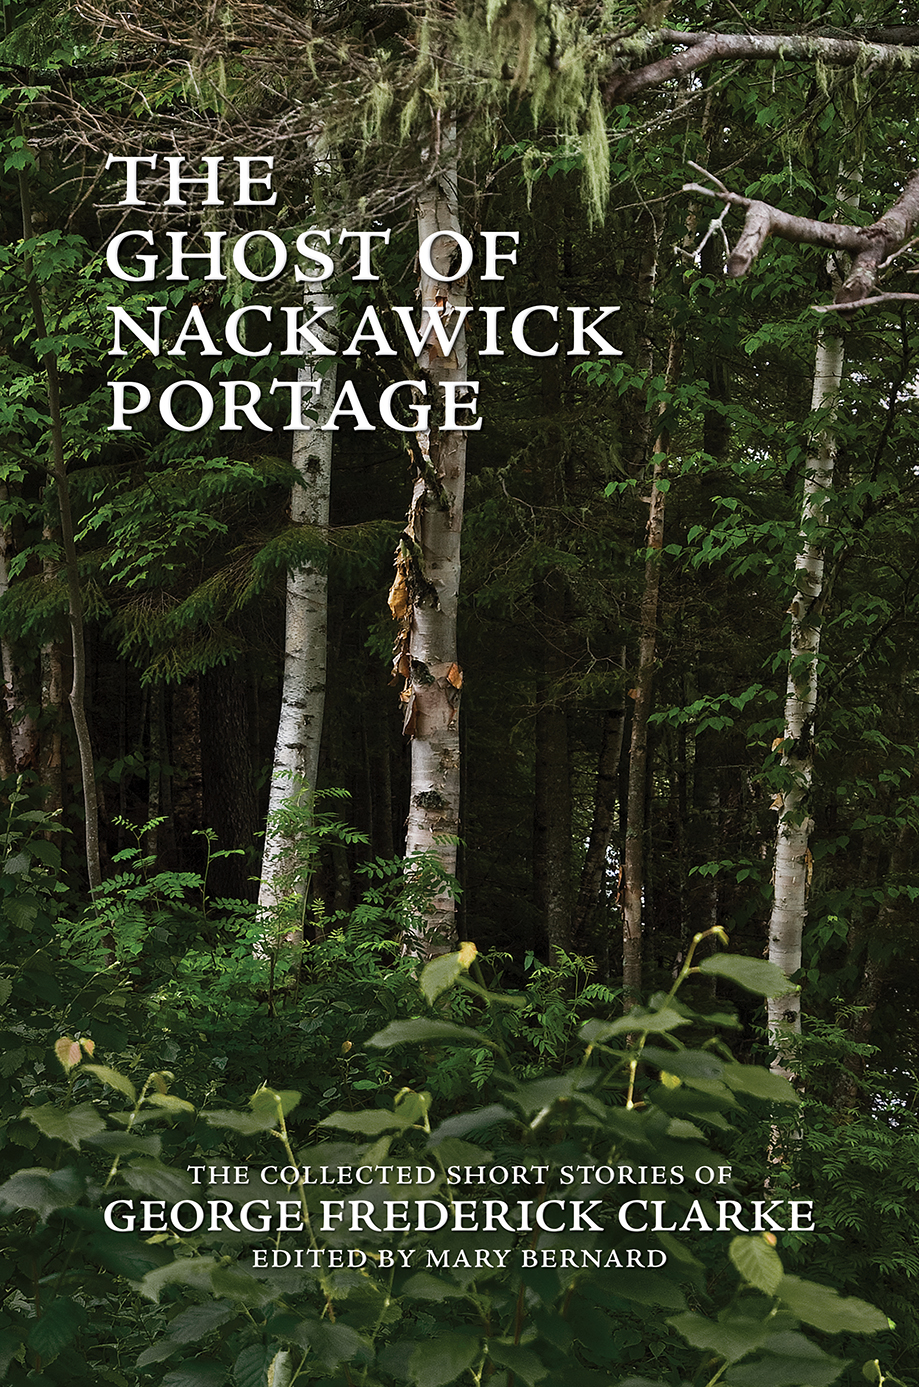 The Ghost of Nackawick Portage